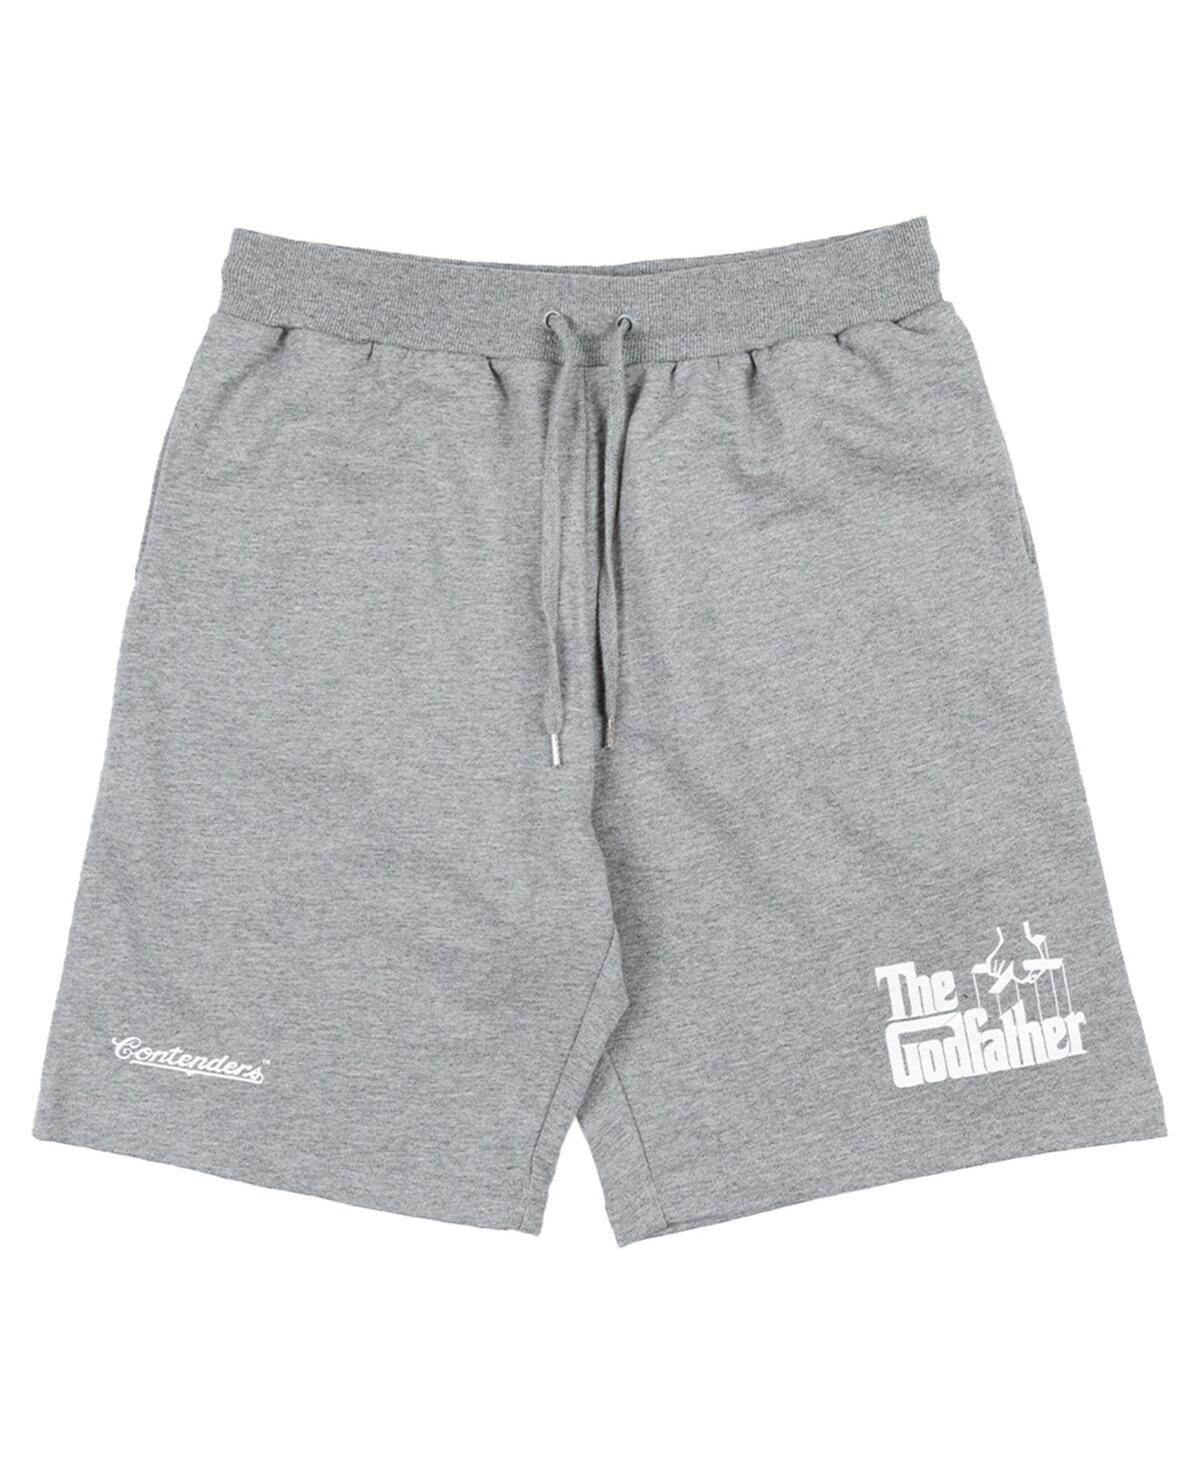 Contenders Clothing Men's  Gray The Godfather Sweat Shorts